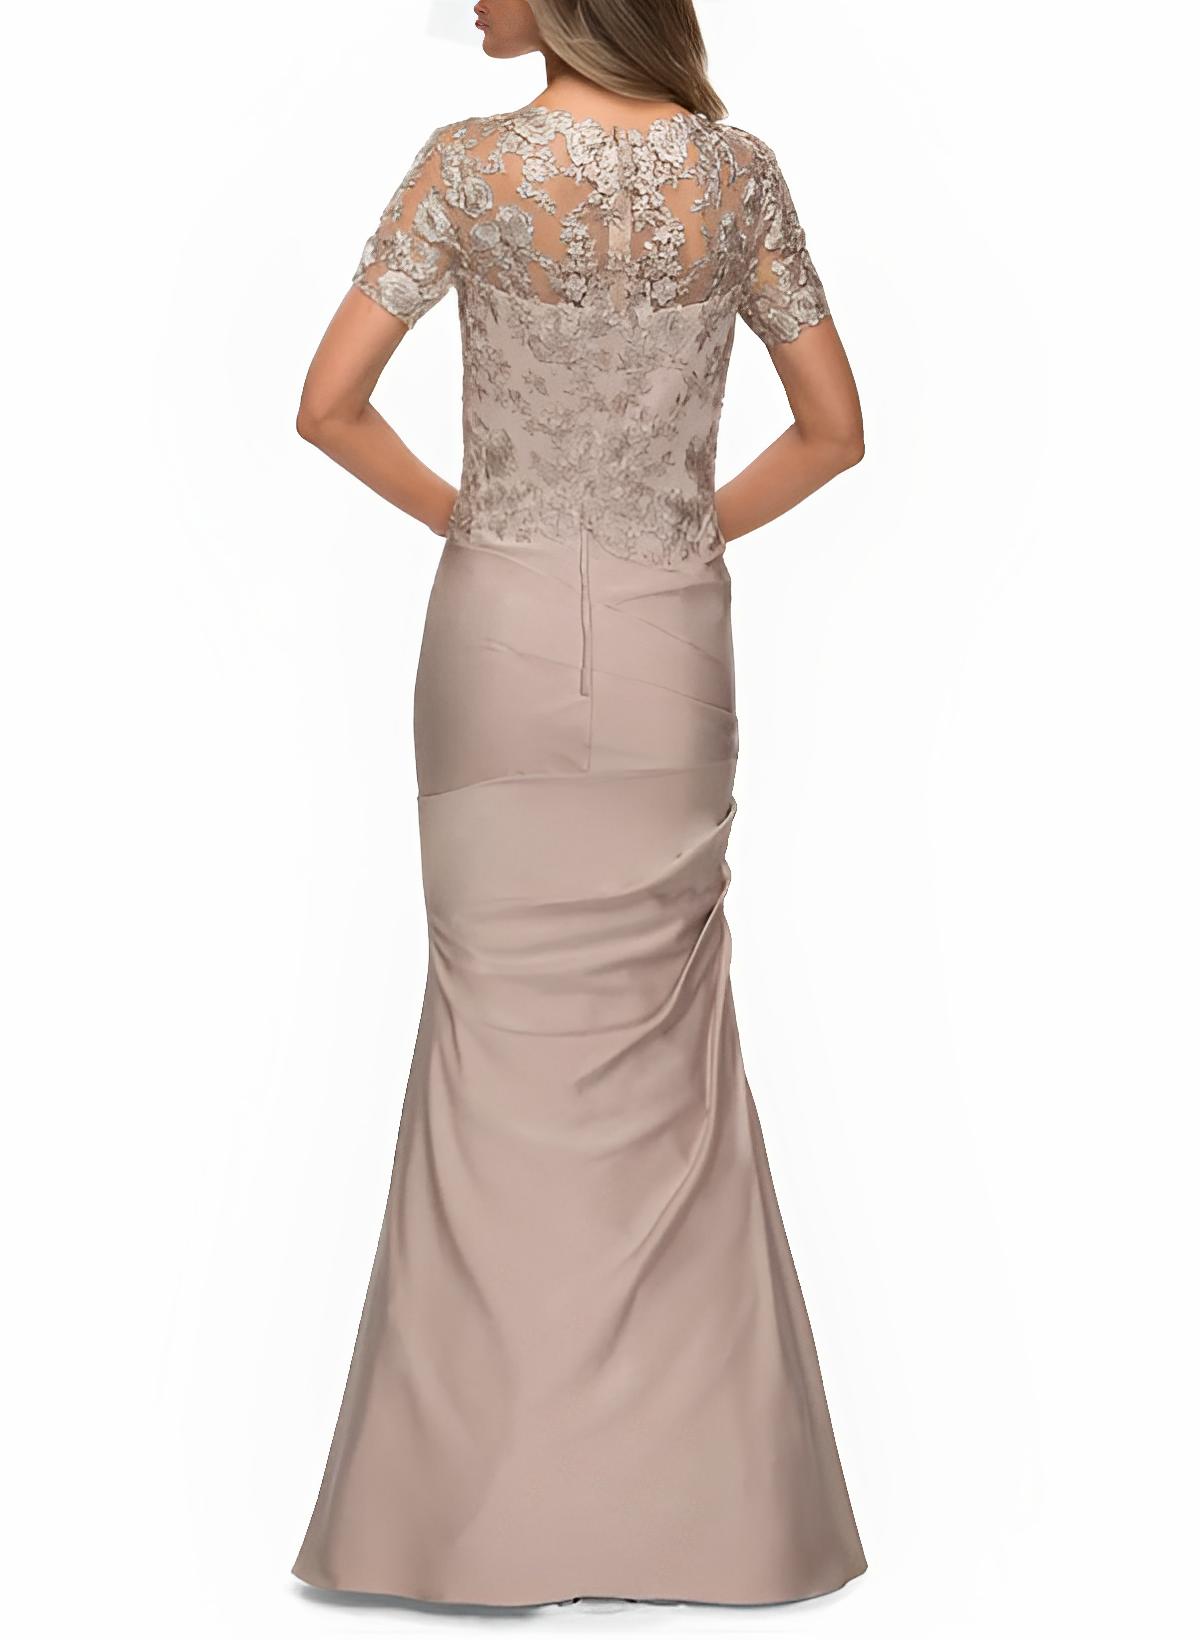 V-Neck Short Sleeves Satin Mother Of The Bride Dresses With Lace